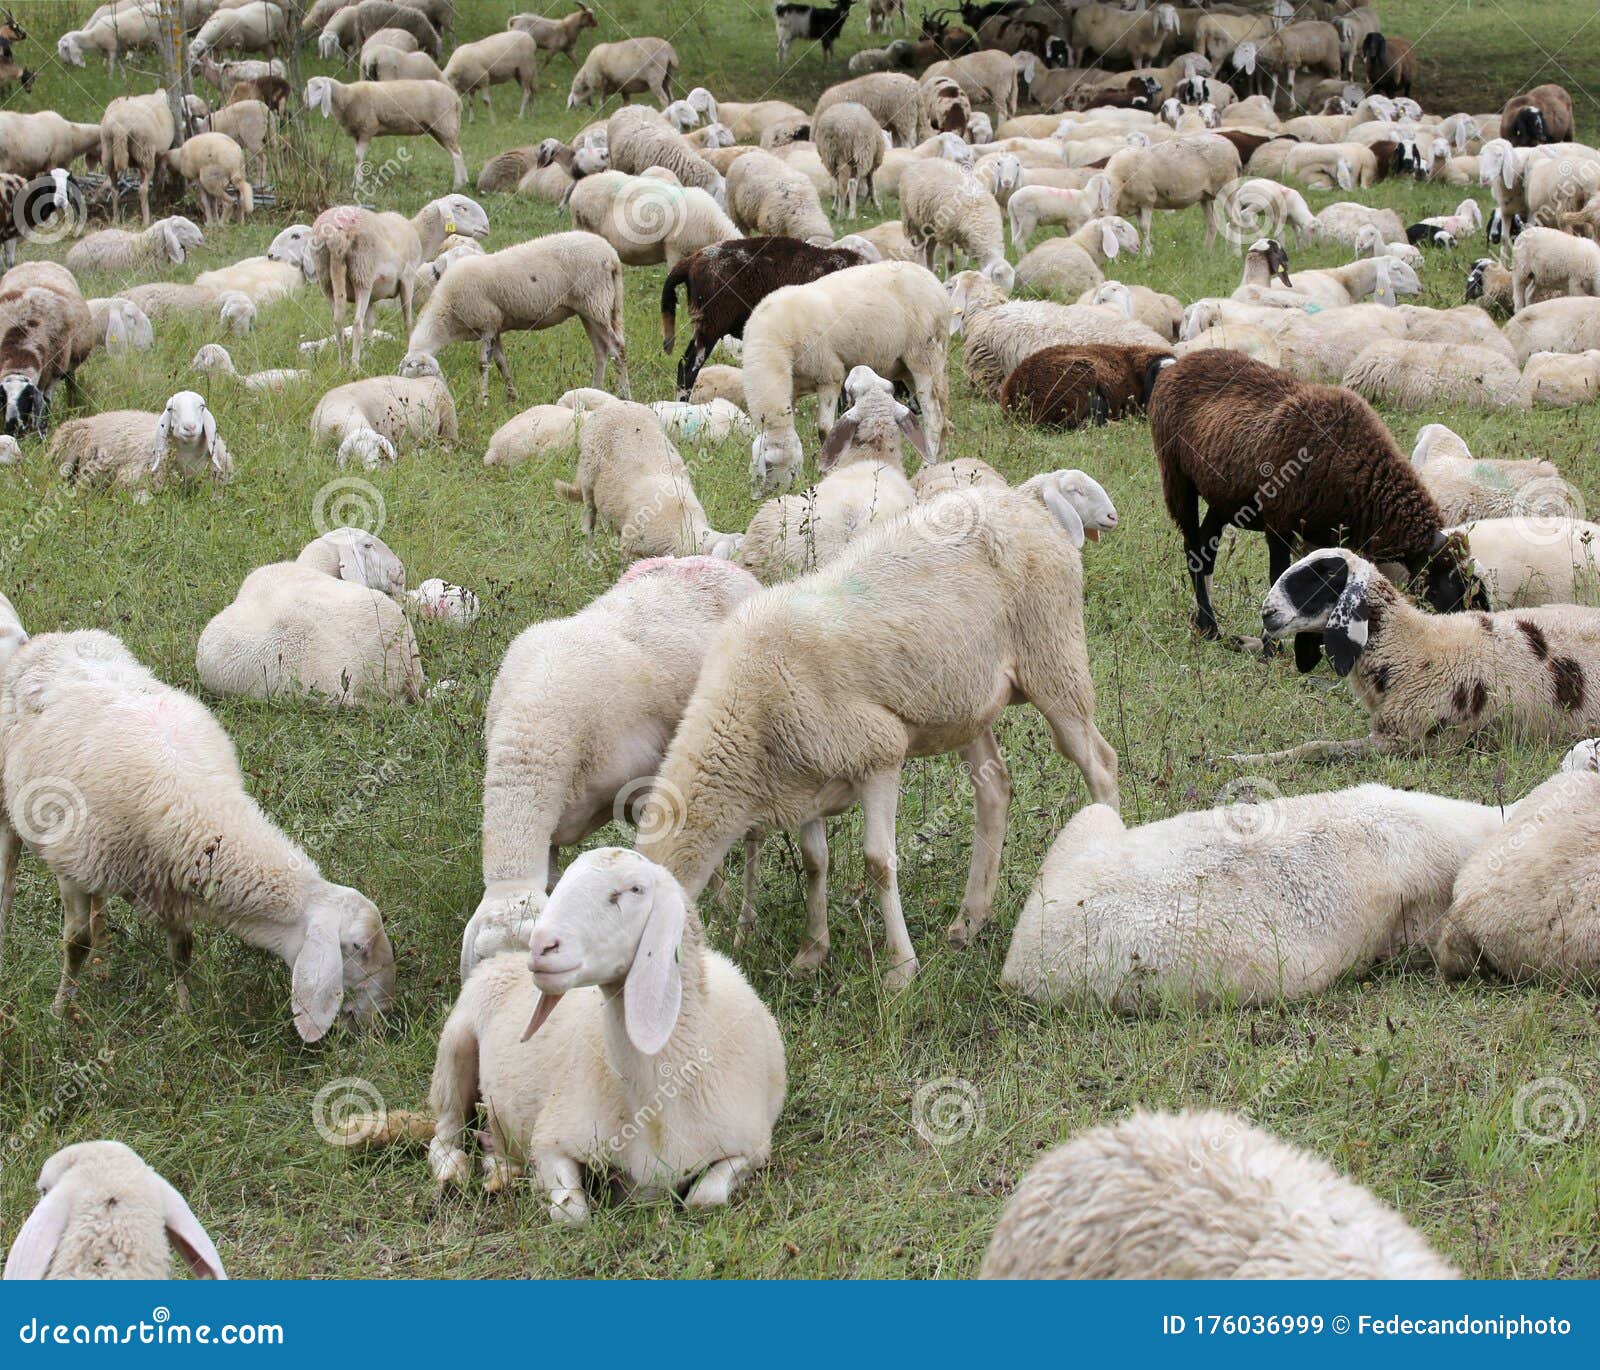 Large Flock Of Sheep And Goats Grazing In The Mountains Stock Image - Image of goats, grazing: 176036999